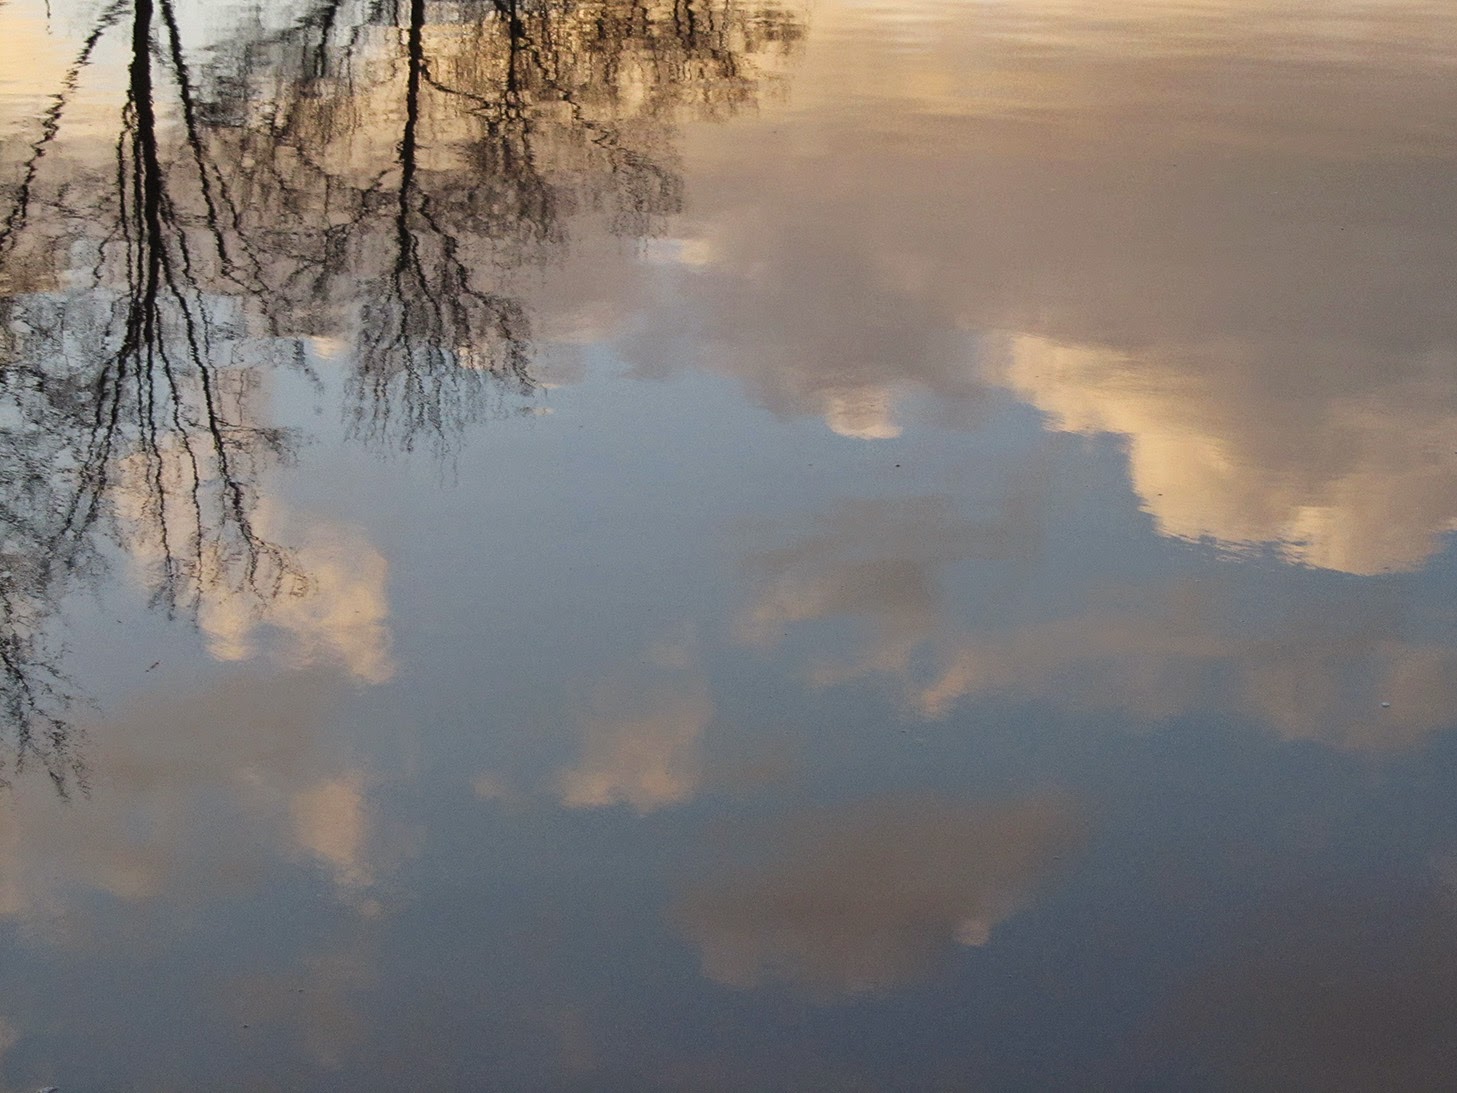 reflected clouds and trees in water